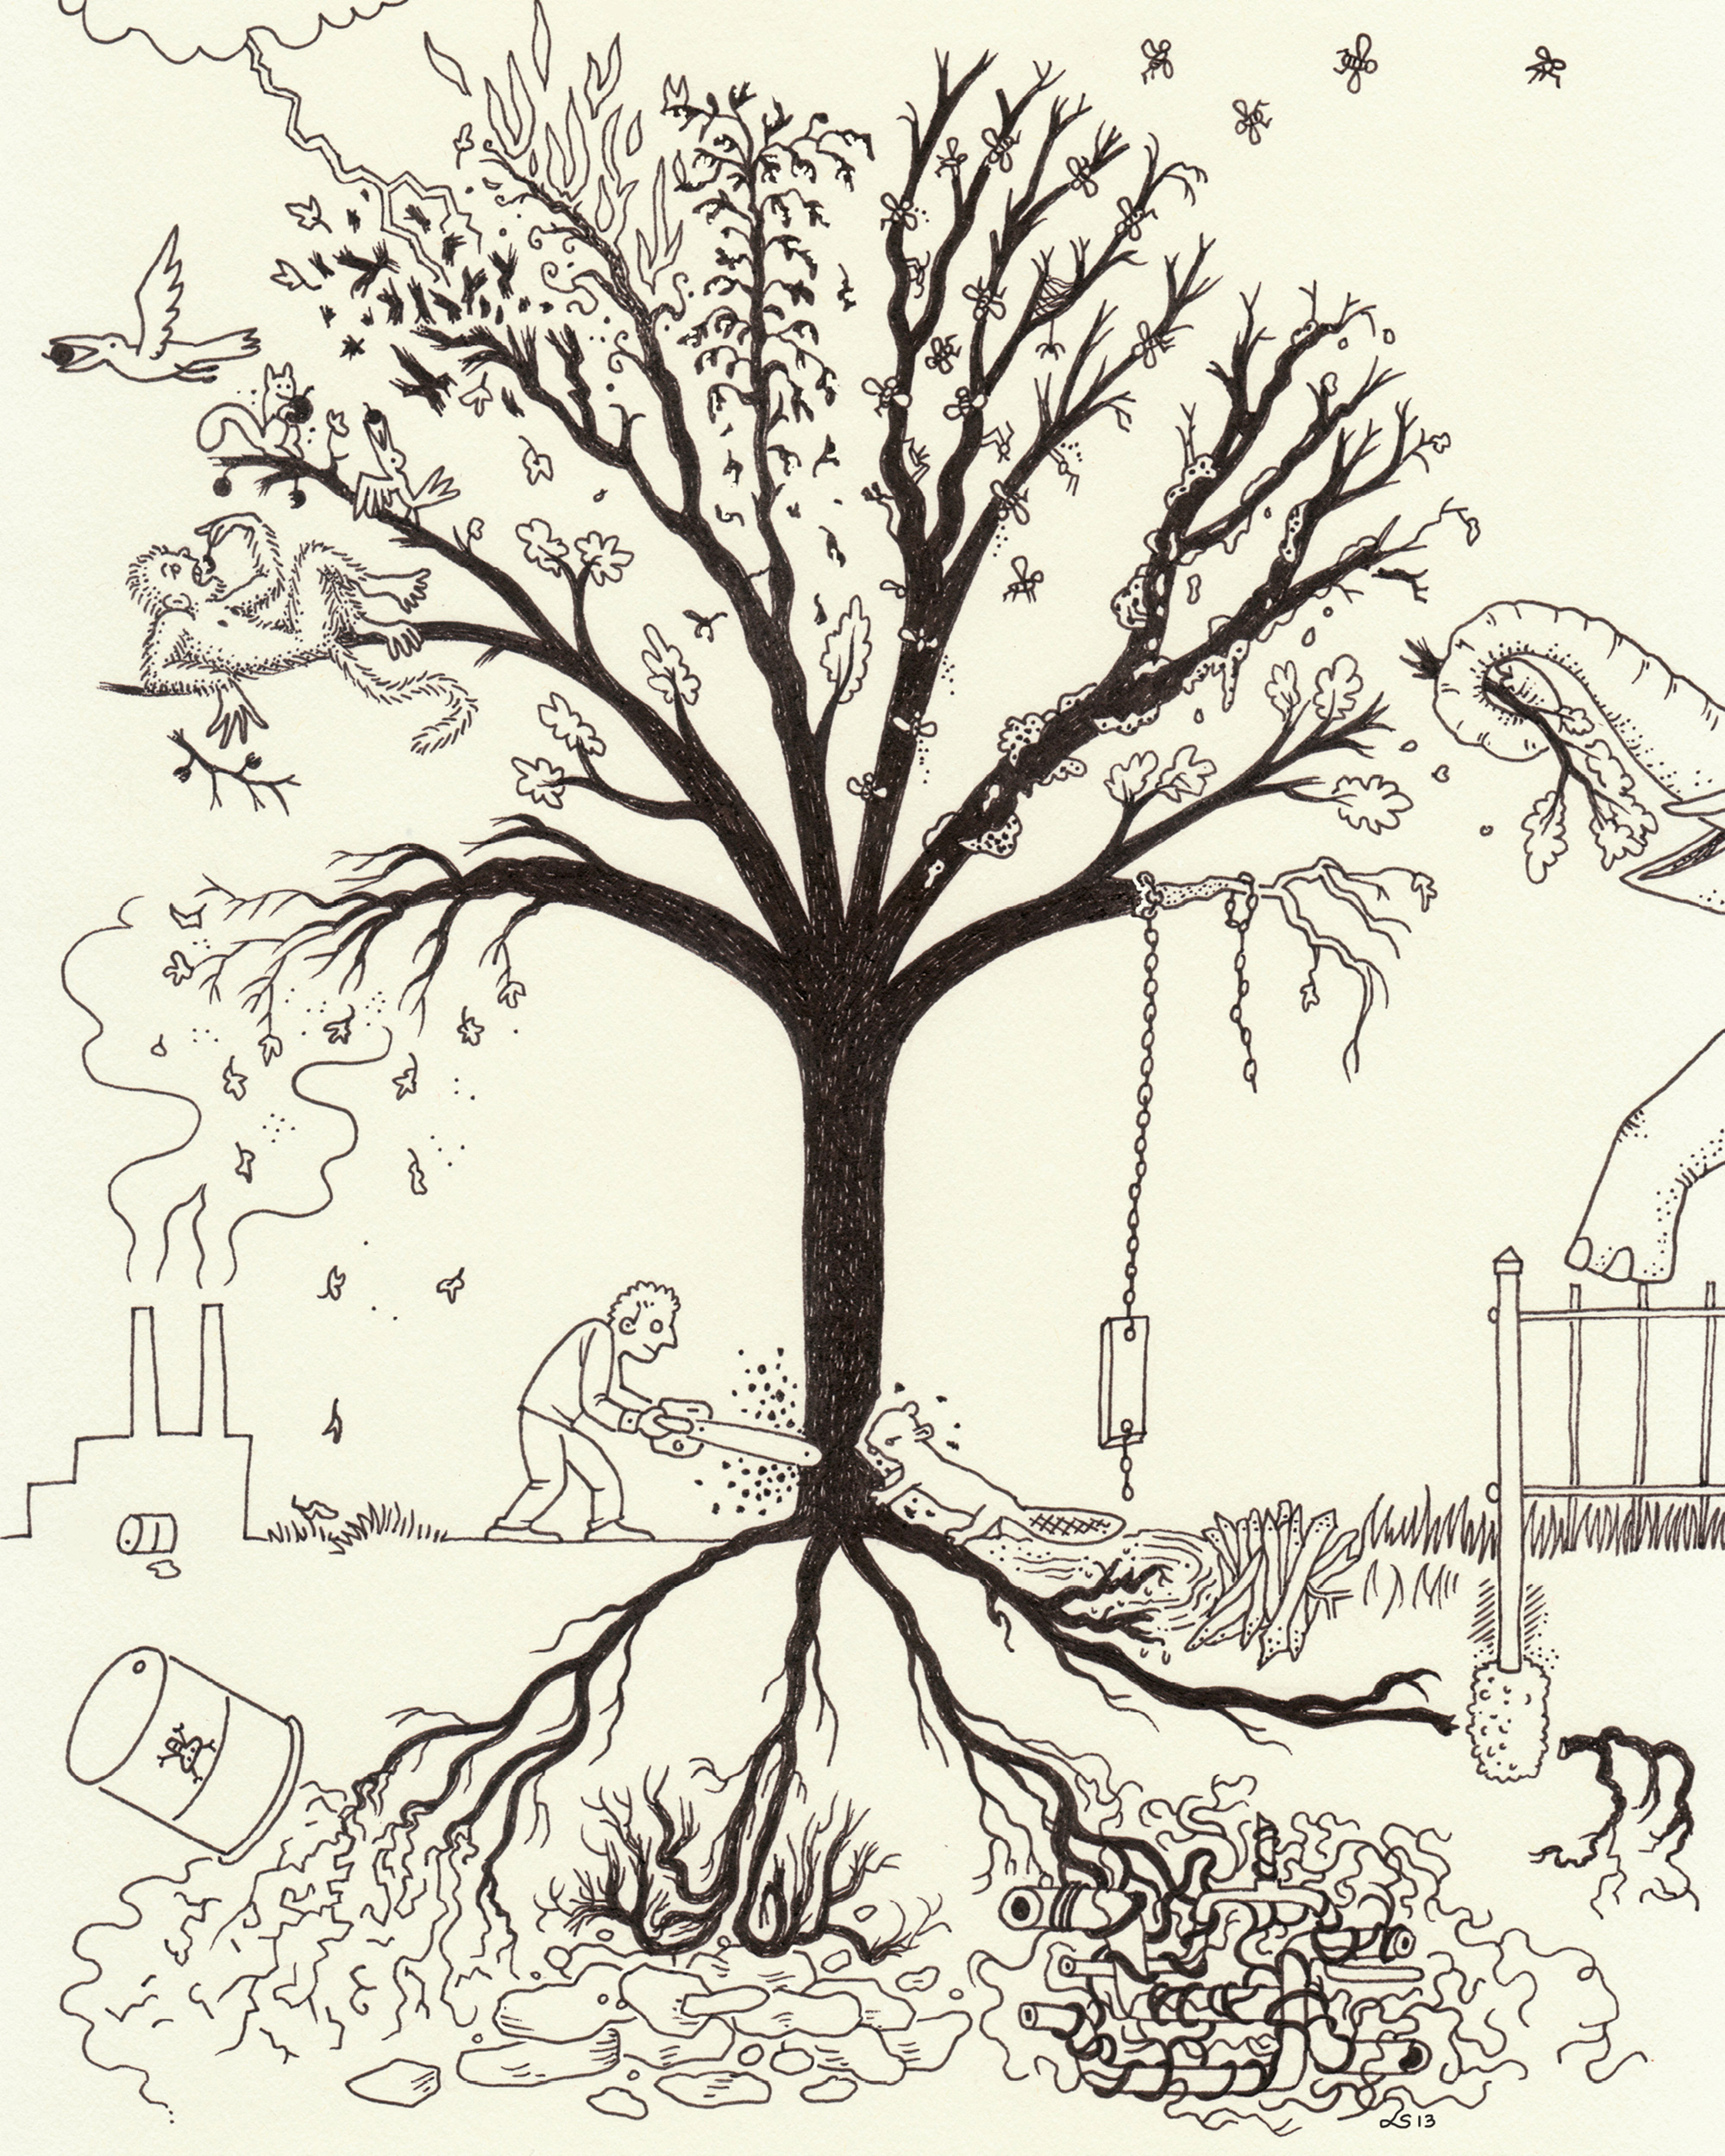 A twenty thirteen drawing by Joel Smith of a tree being cut down by a chainsaw and a beaver.